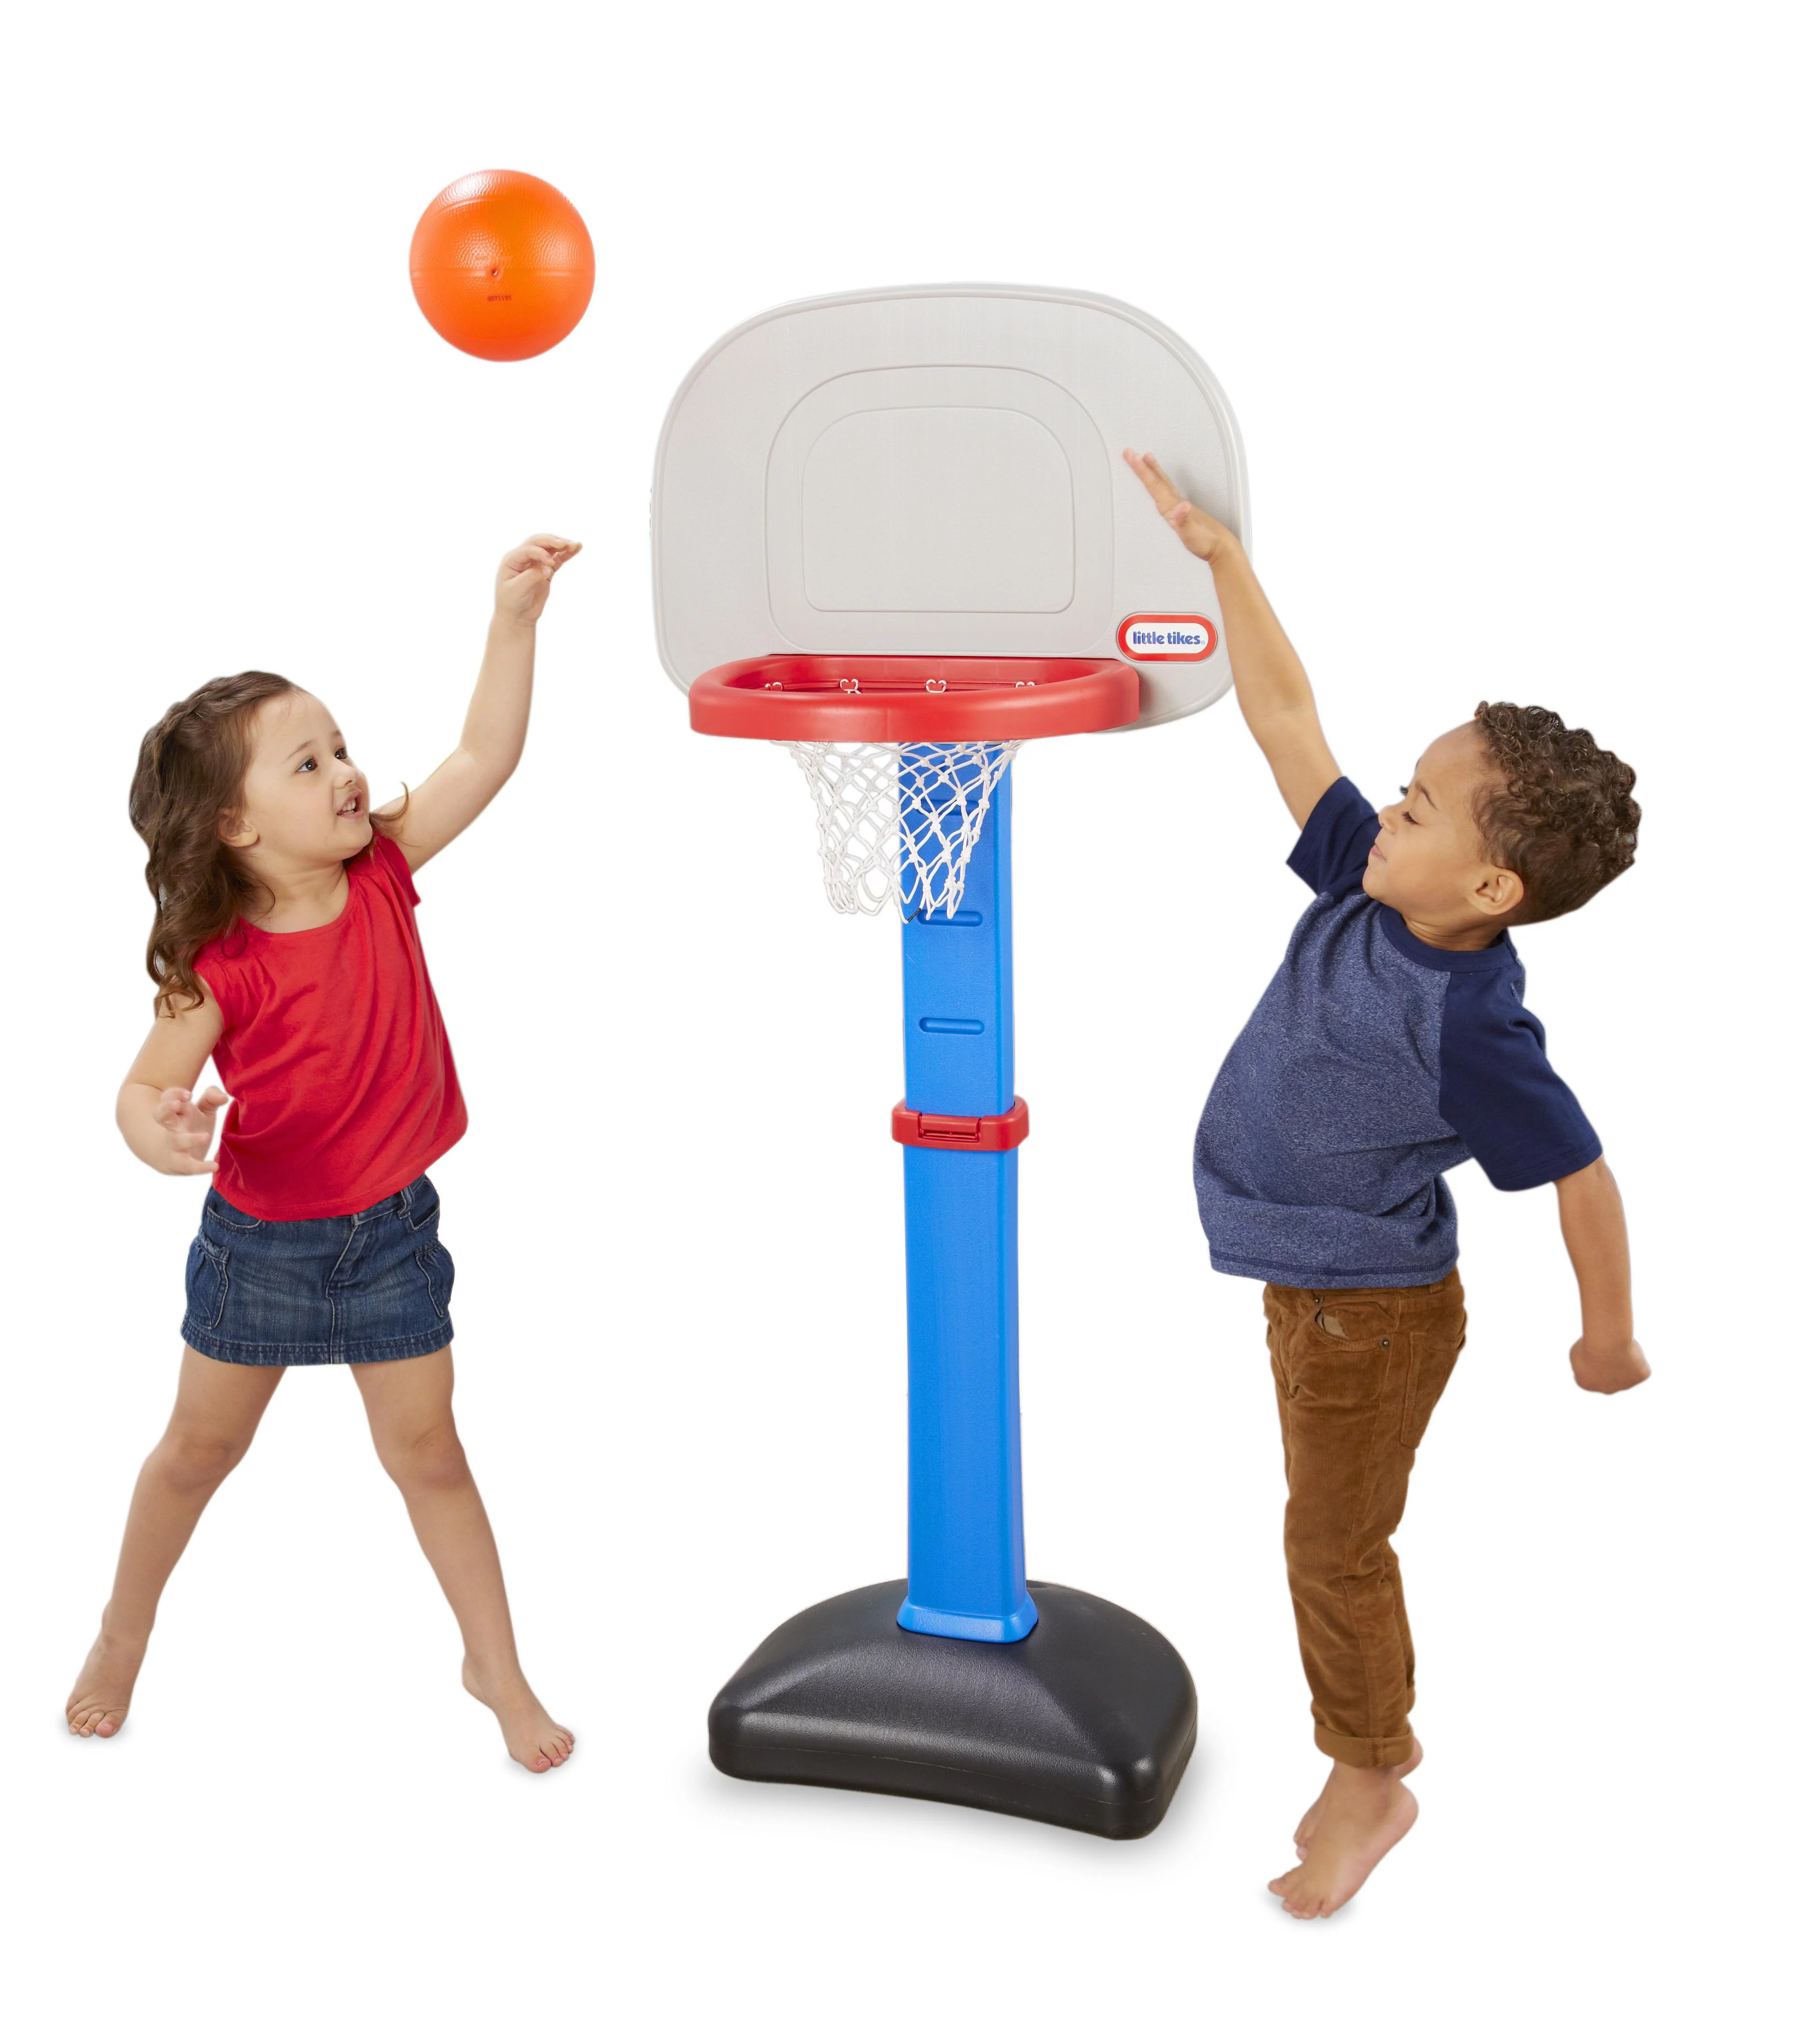 Little Tikes TotSports Easy Score Toy Basketball Hoop with Ball, Height Adjustable, Indoor Outdoor Backyard Toy Sports Play Set For Kids Girls Boys Ages 18 months to 5 Year Old, Blue